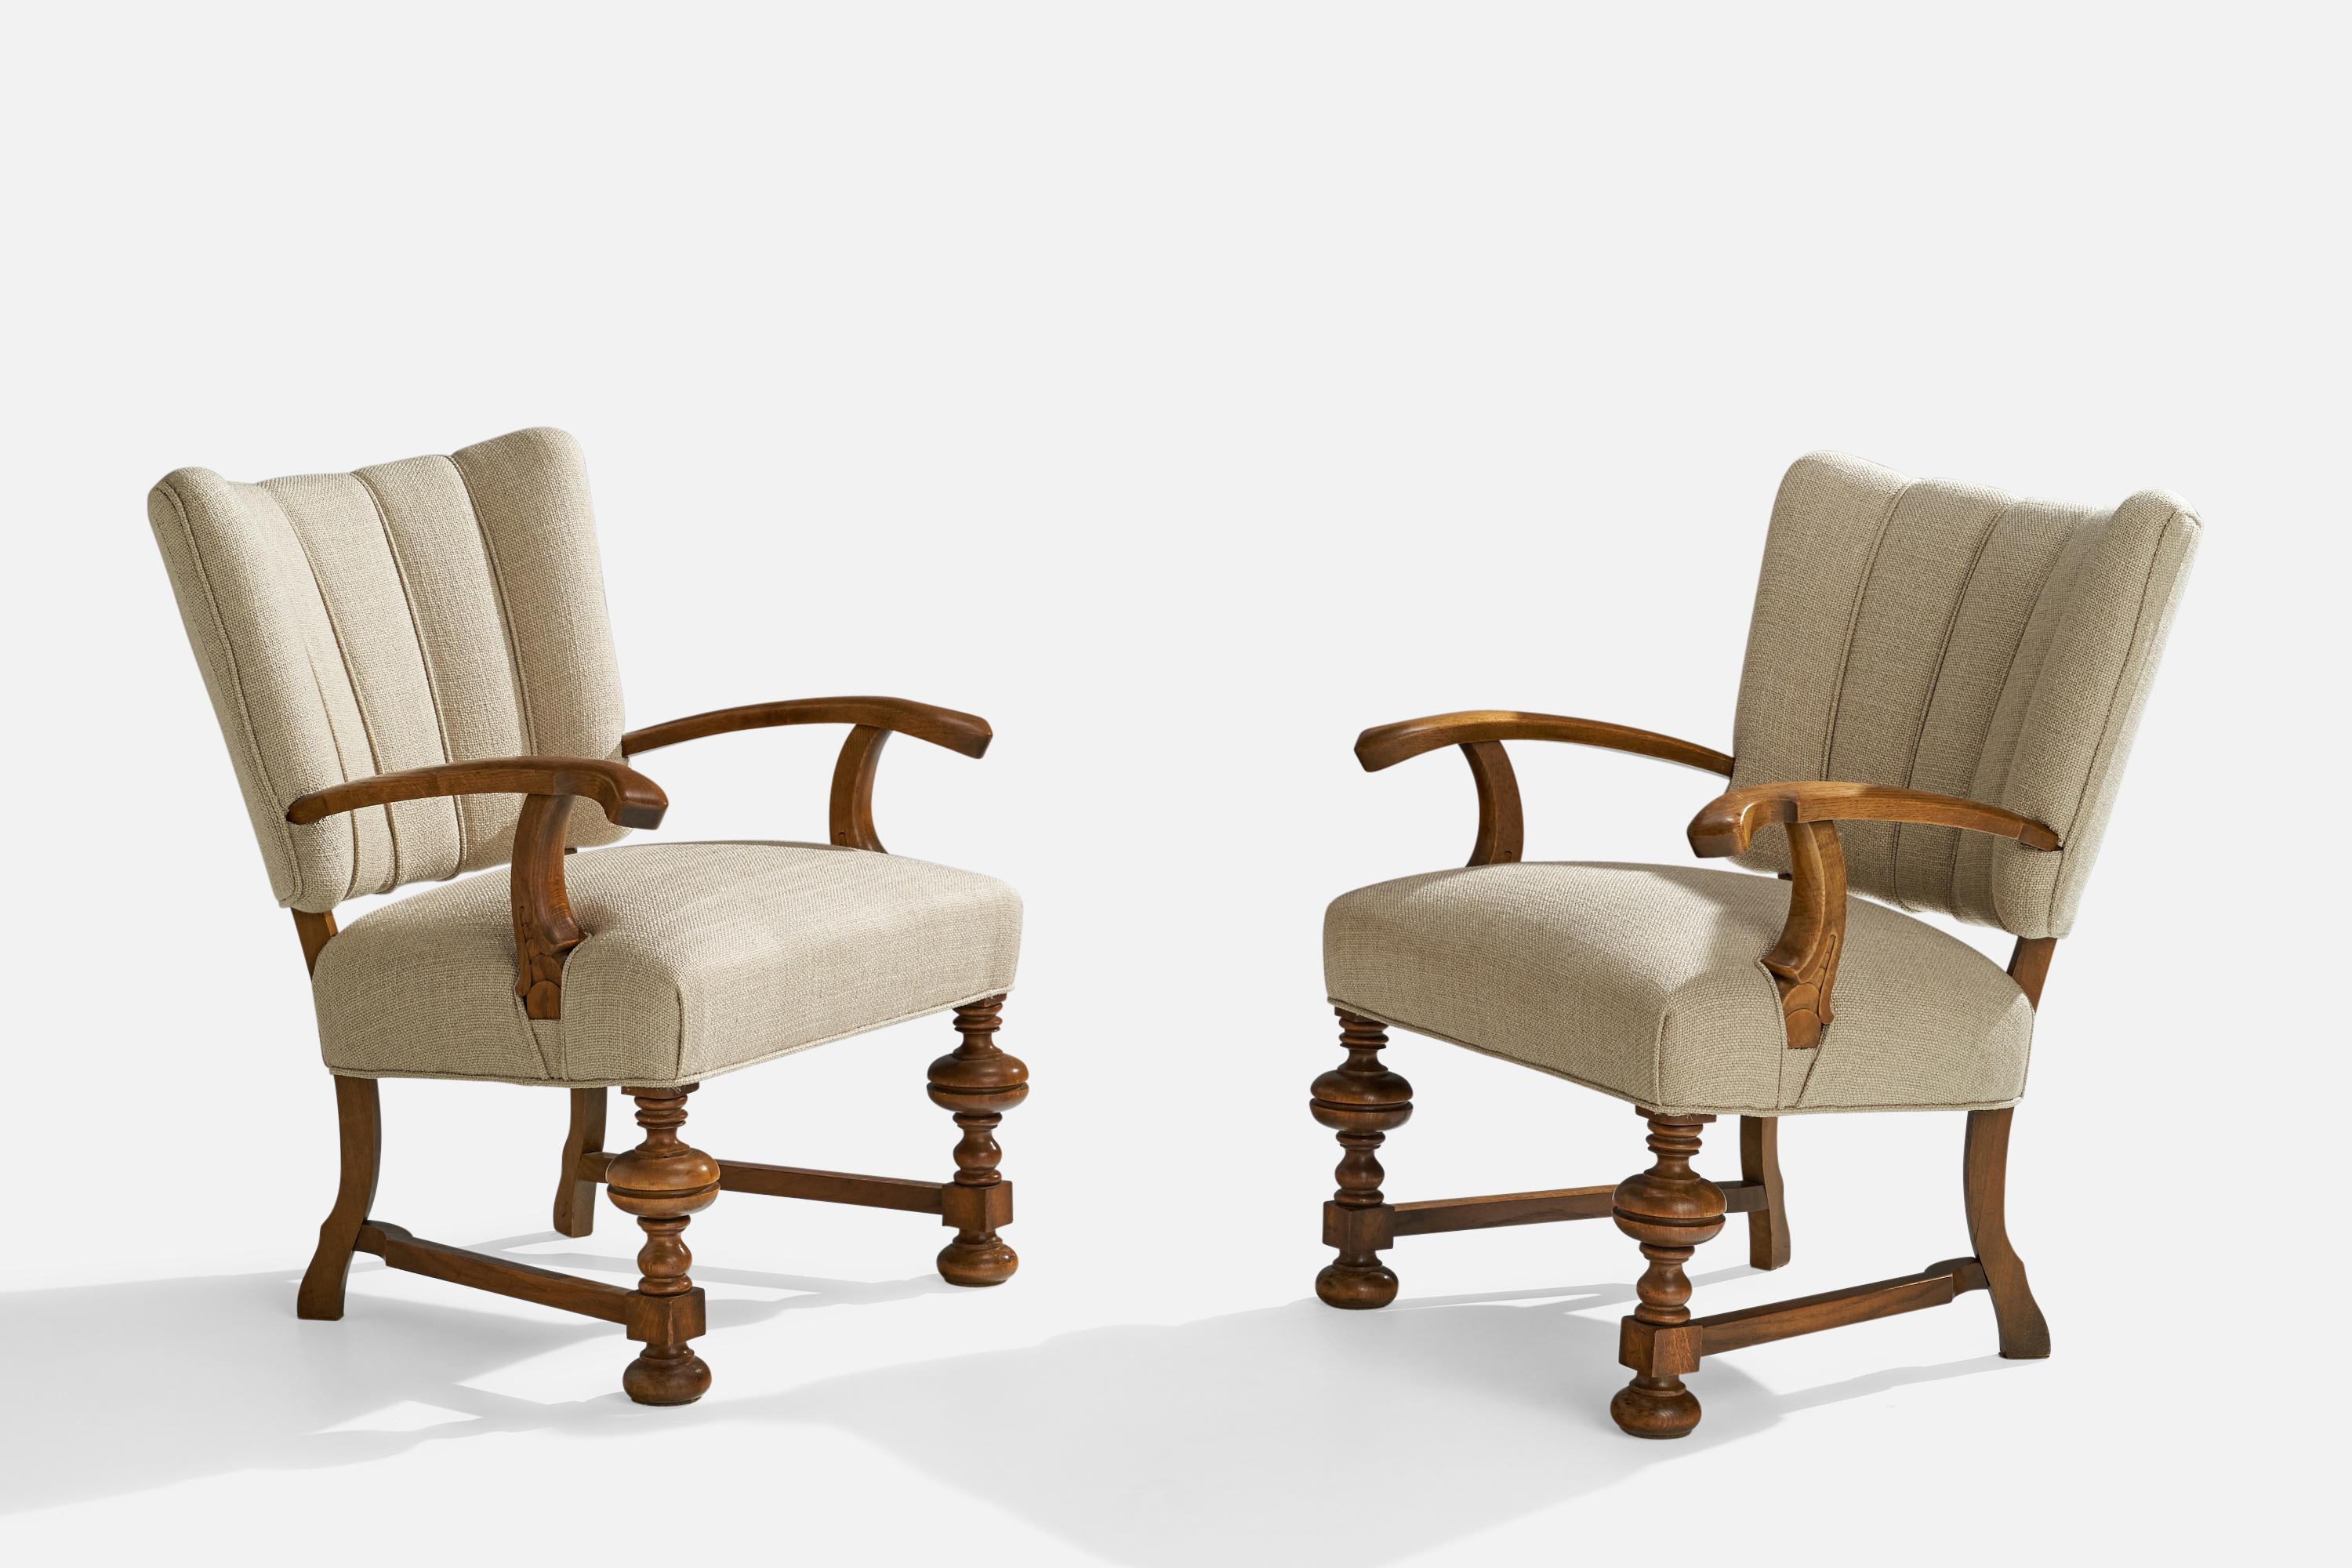 A pair of oak and off-white fabric lounge chairs or armchairs designed and produced in Denmark, c. 1930s.

Seat height 17.5”.